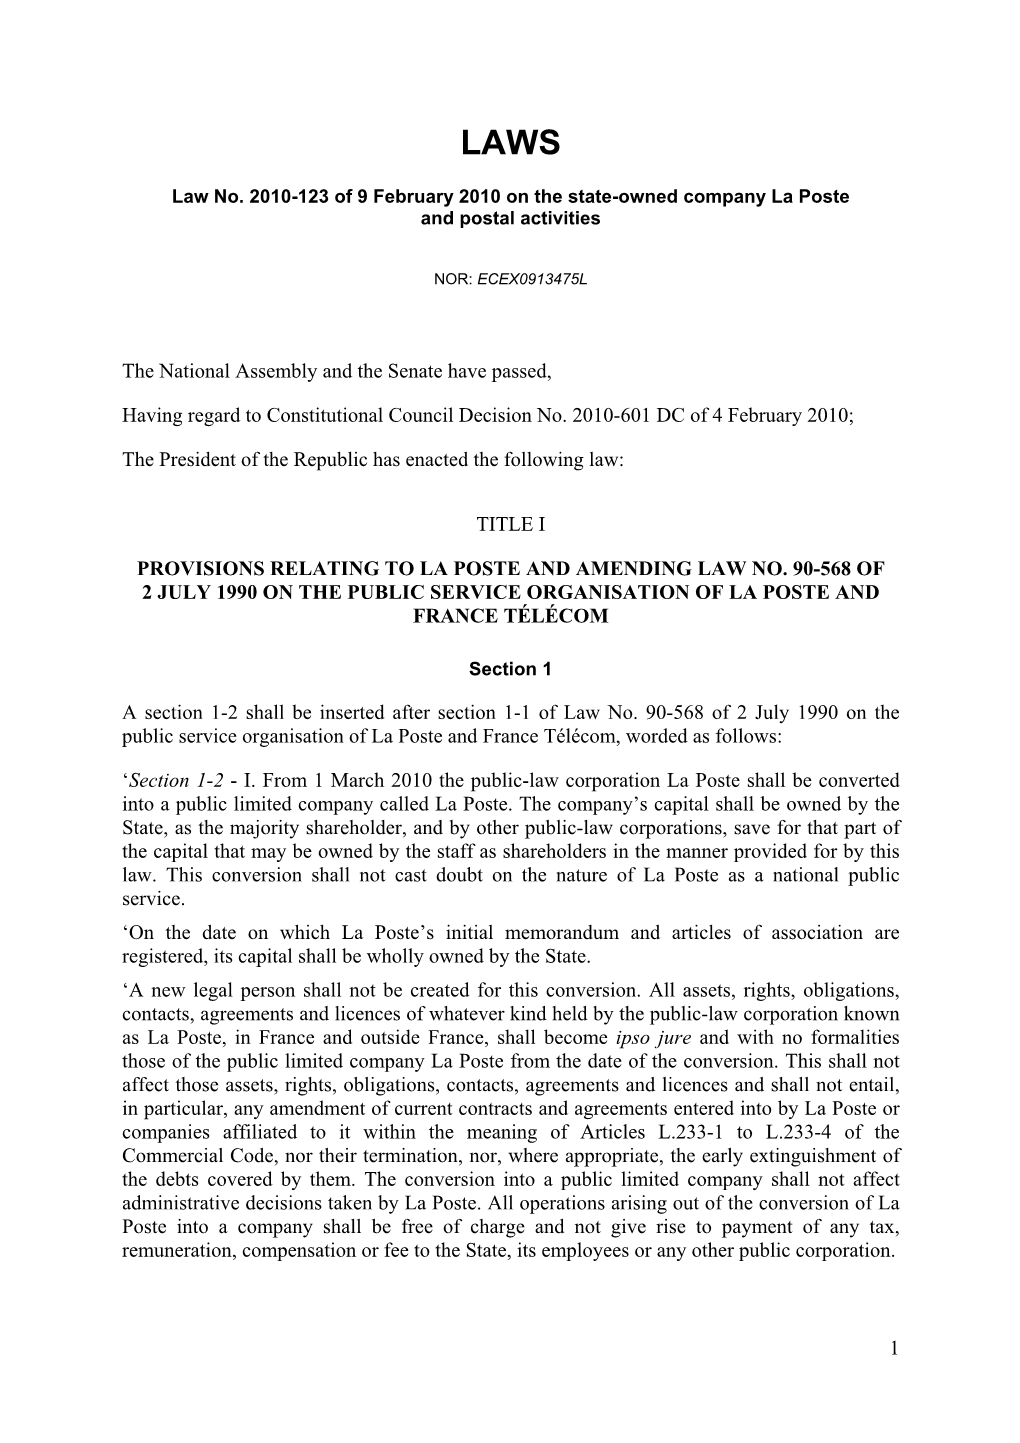 Law No. 2010-123 of 9 February 2010 on the State-Owned Company La Poste and Postal Activities